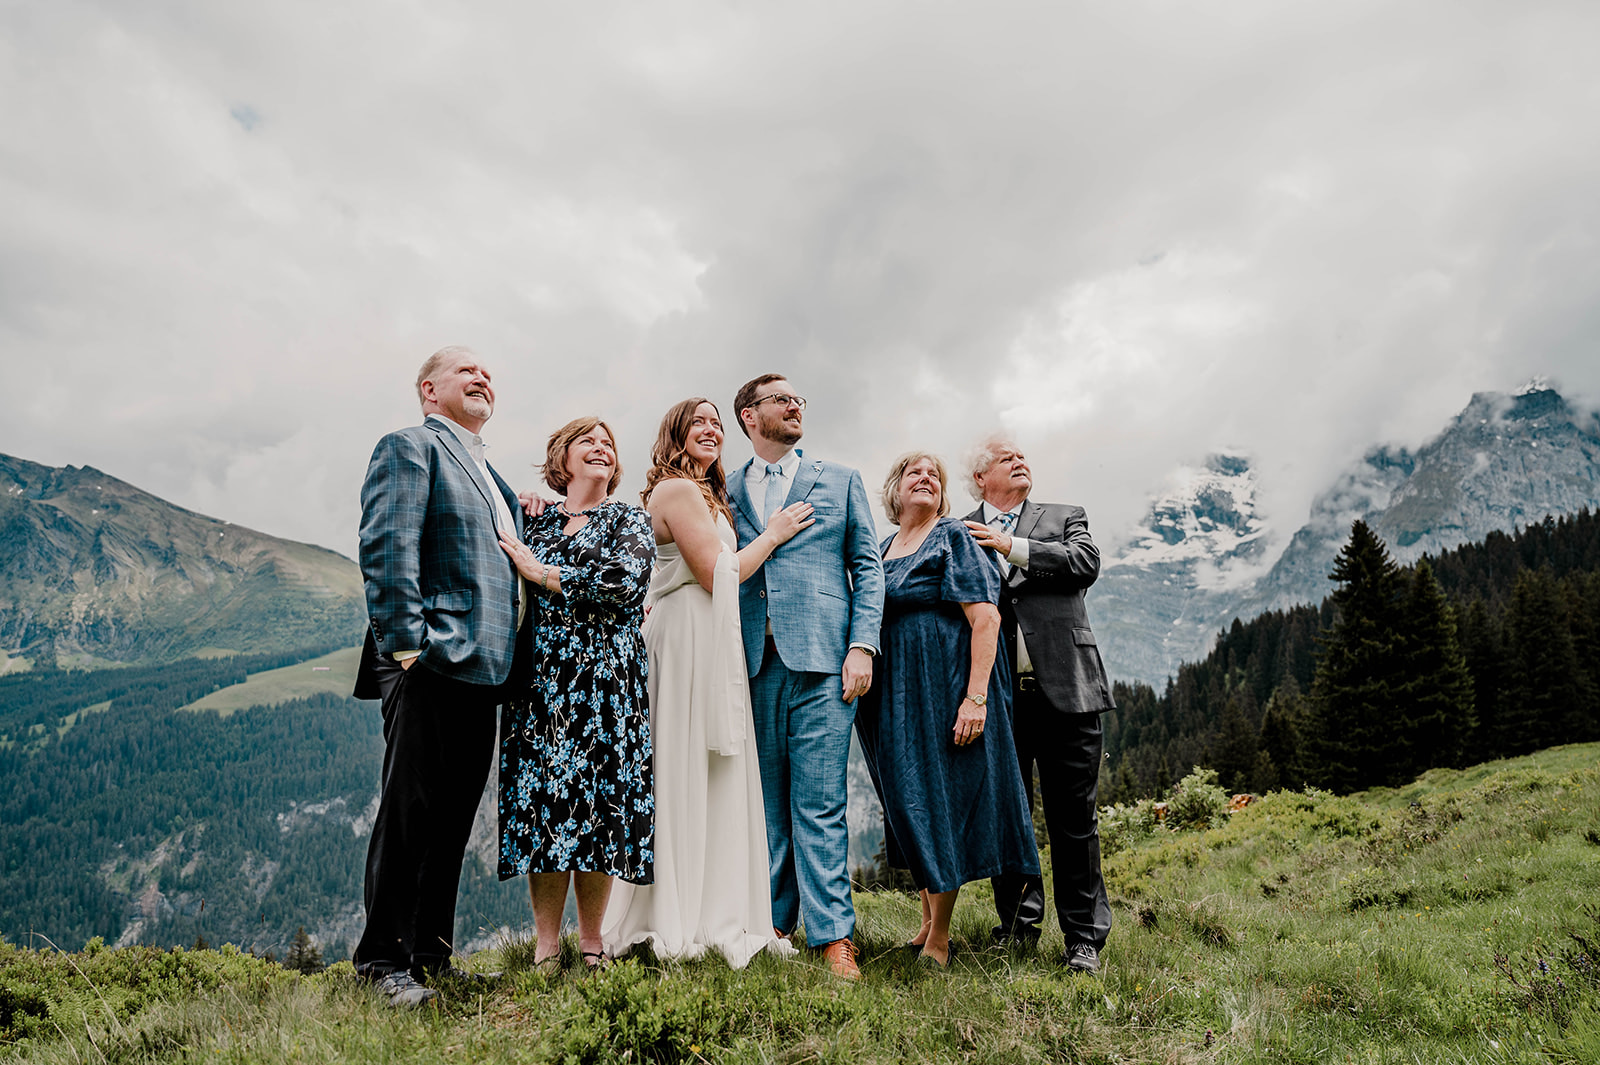 A couple elope in Lauterbrunnen and say their vows in front of the iconic Jungfrau, Eiger and Mönch Swiss Alps